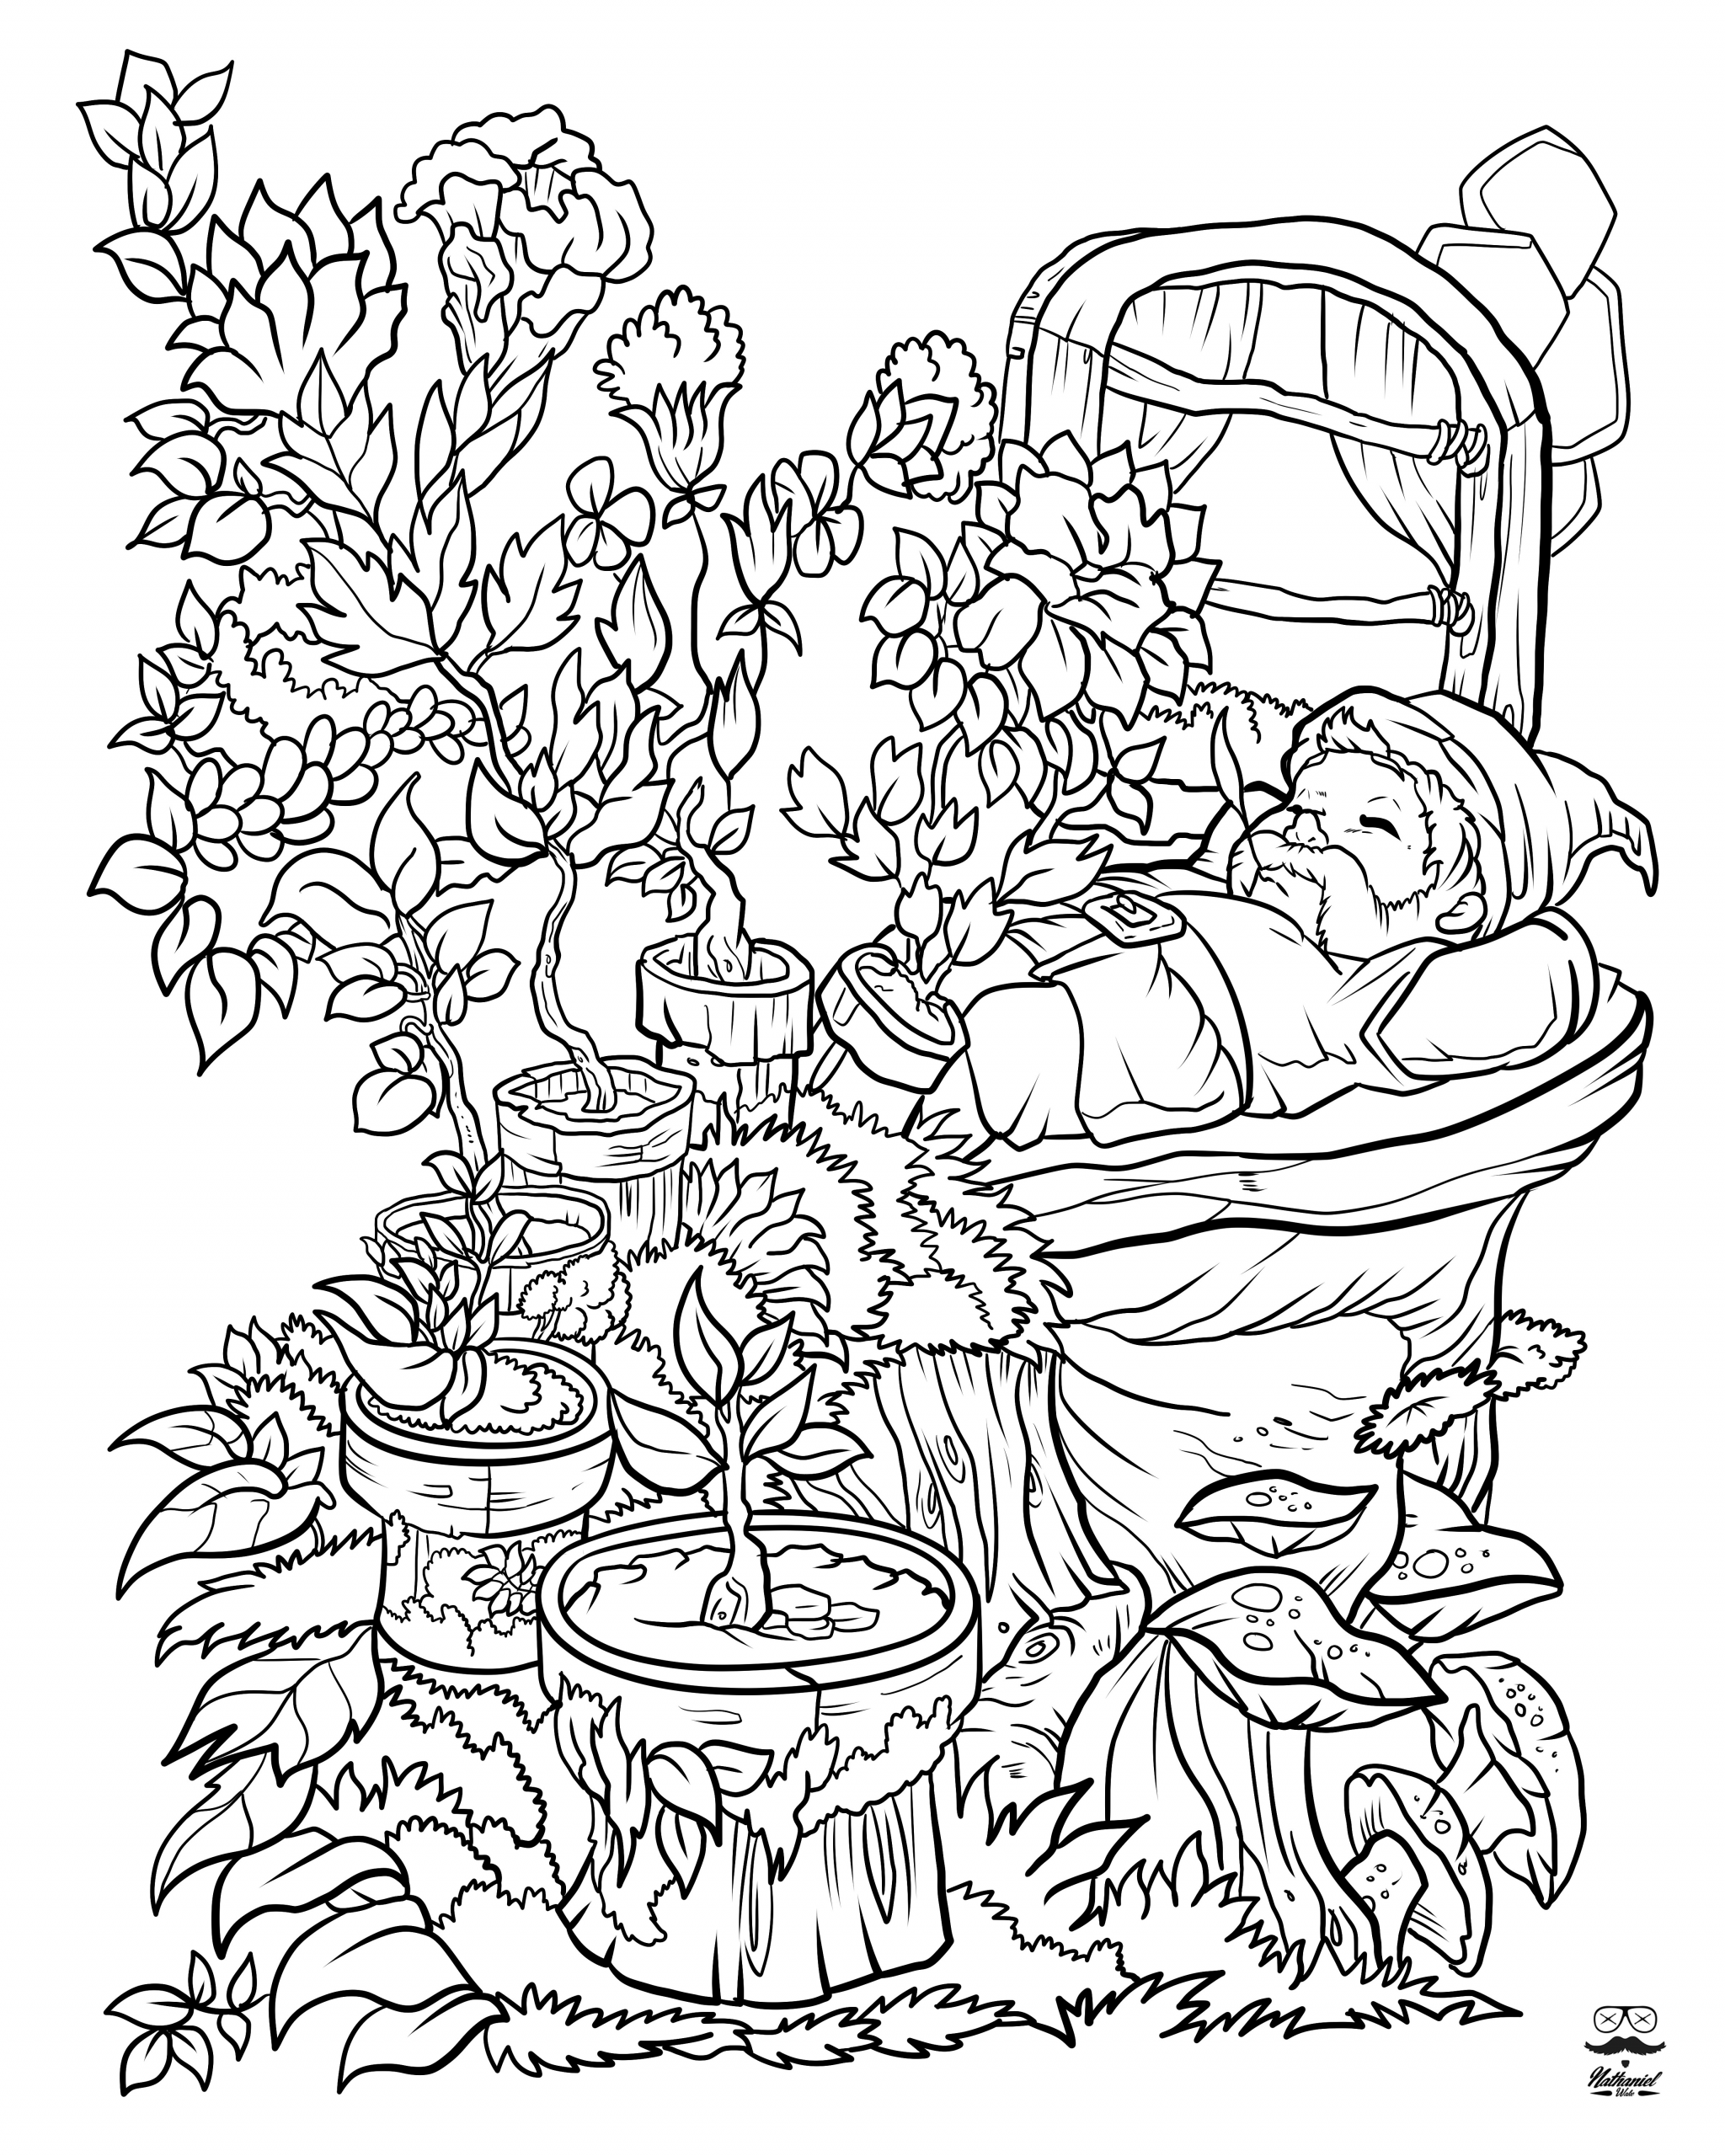 Floral Coloring Books For Adults
 Floral Fantasy Digital Version Adult Coloring Book